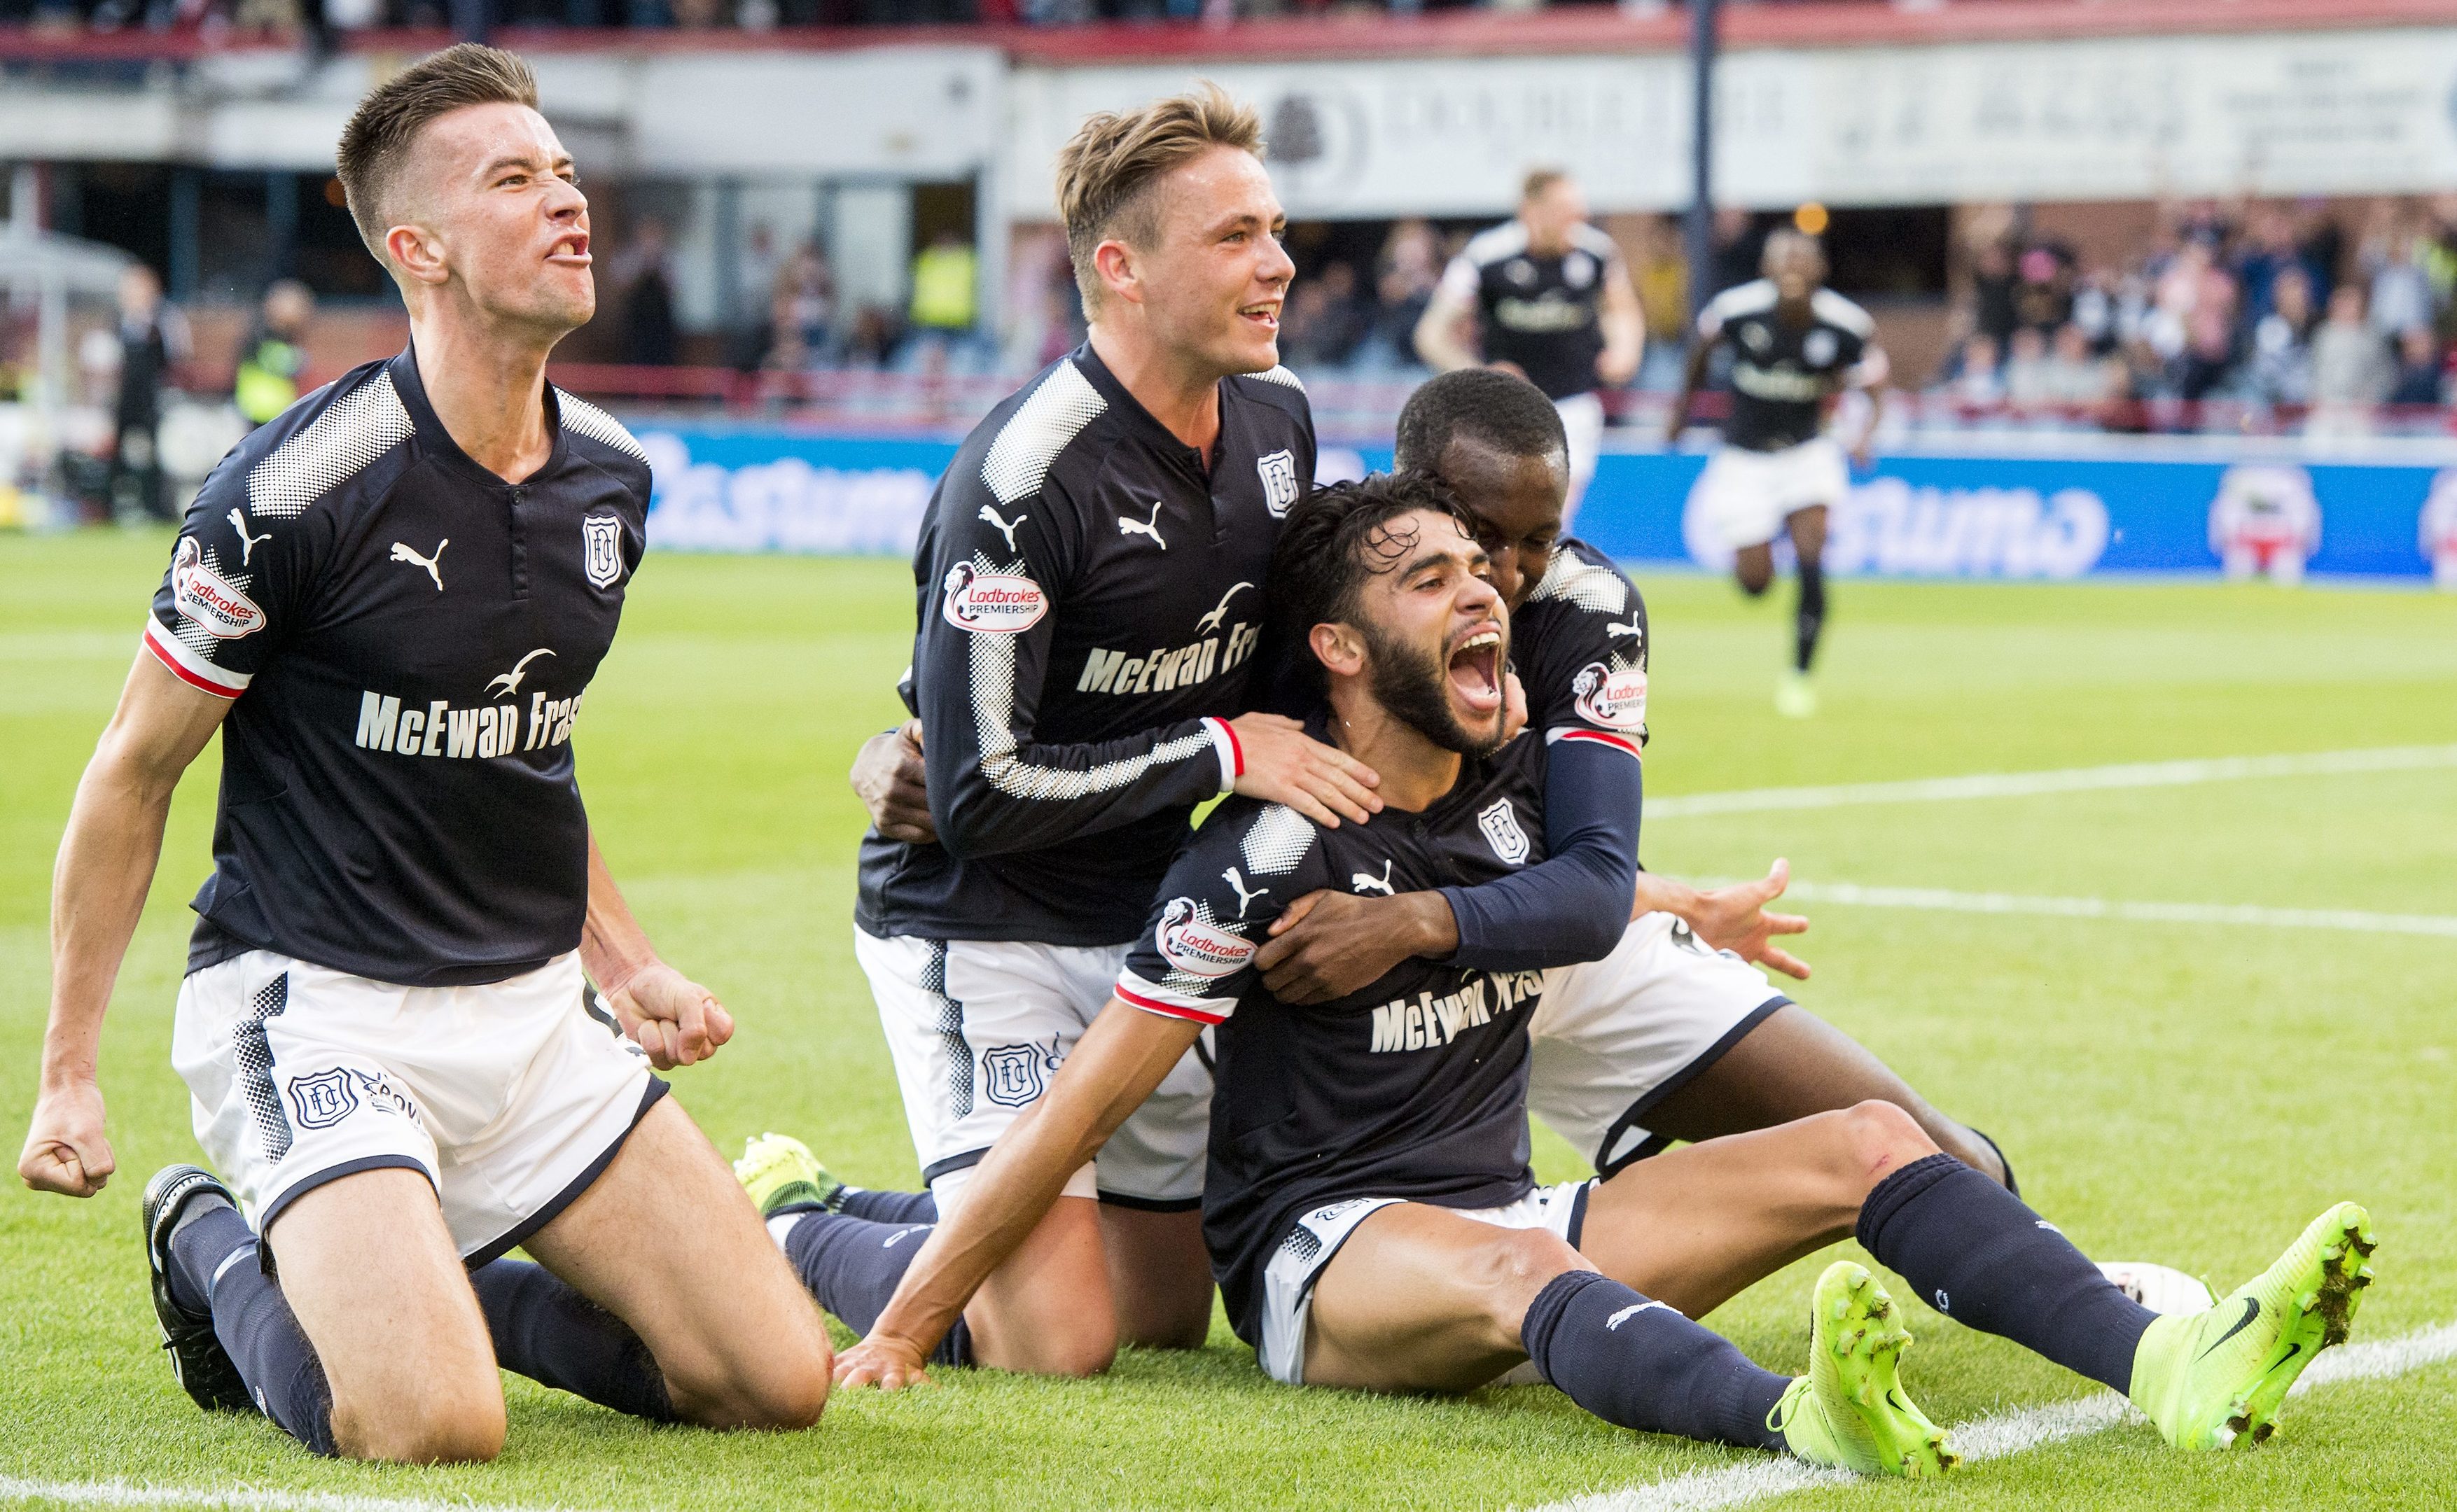 The Dundee players celebrate the opening goal.